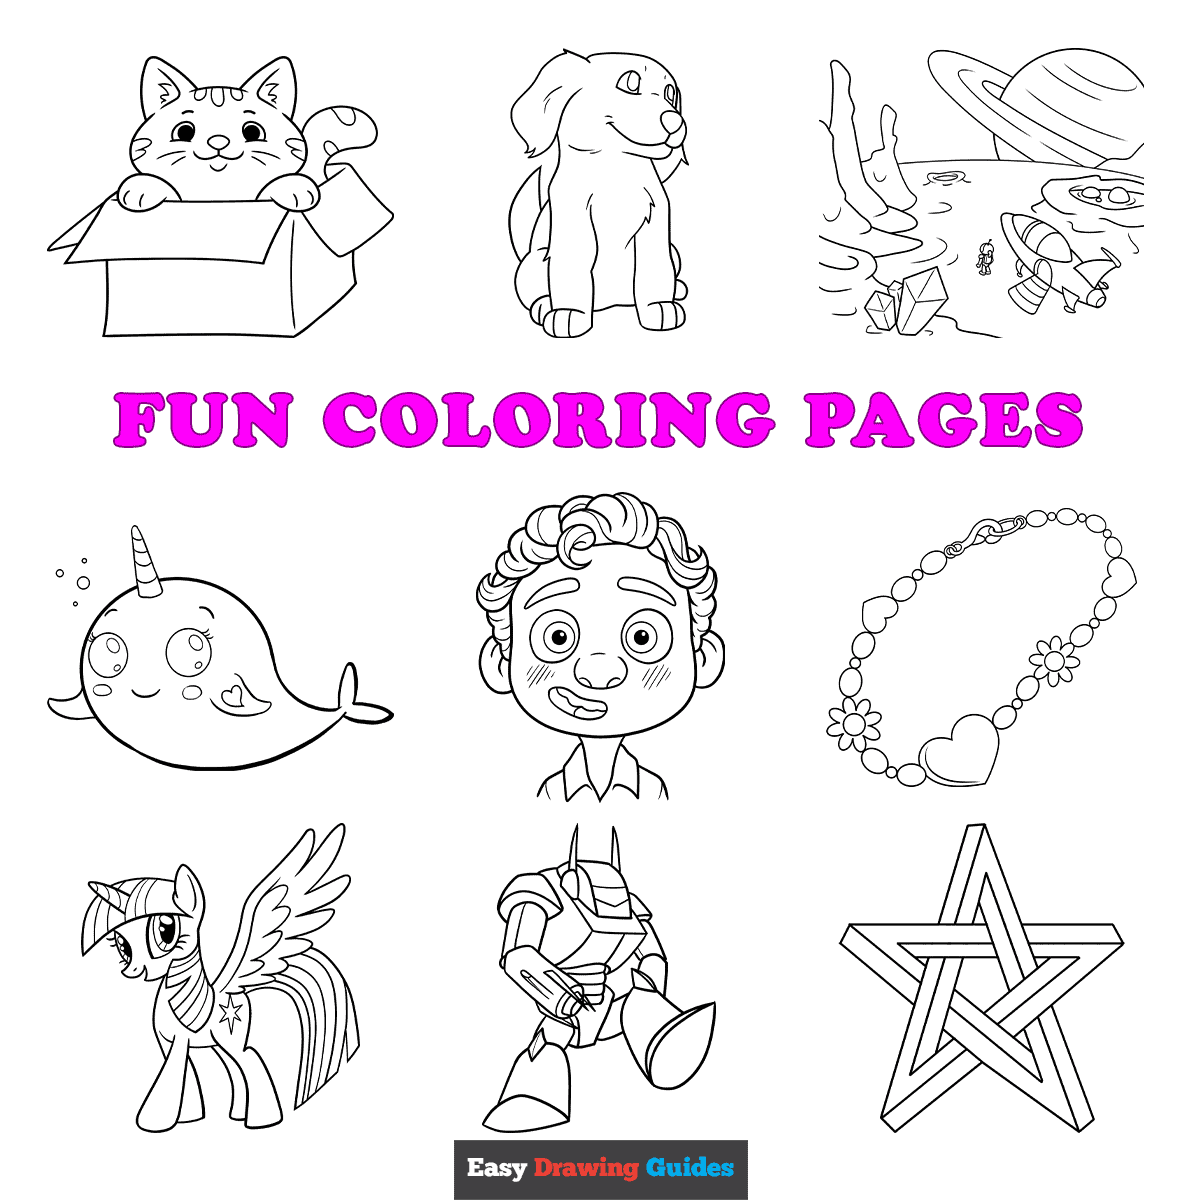 Free printable fun coloring pages for kids